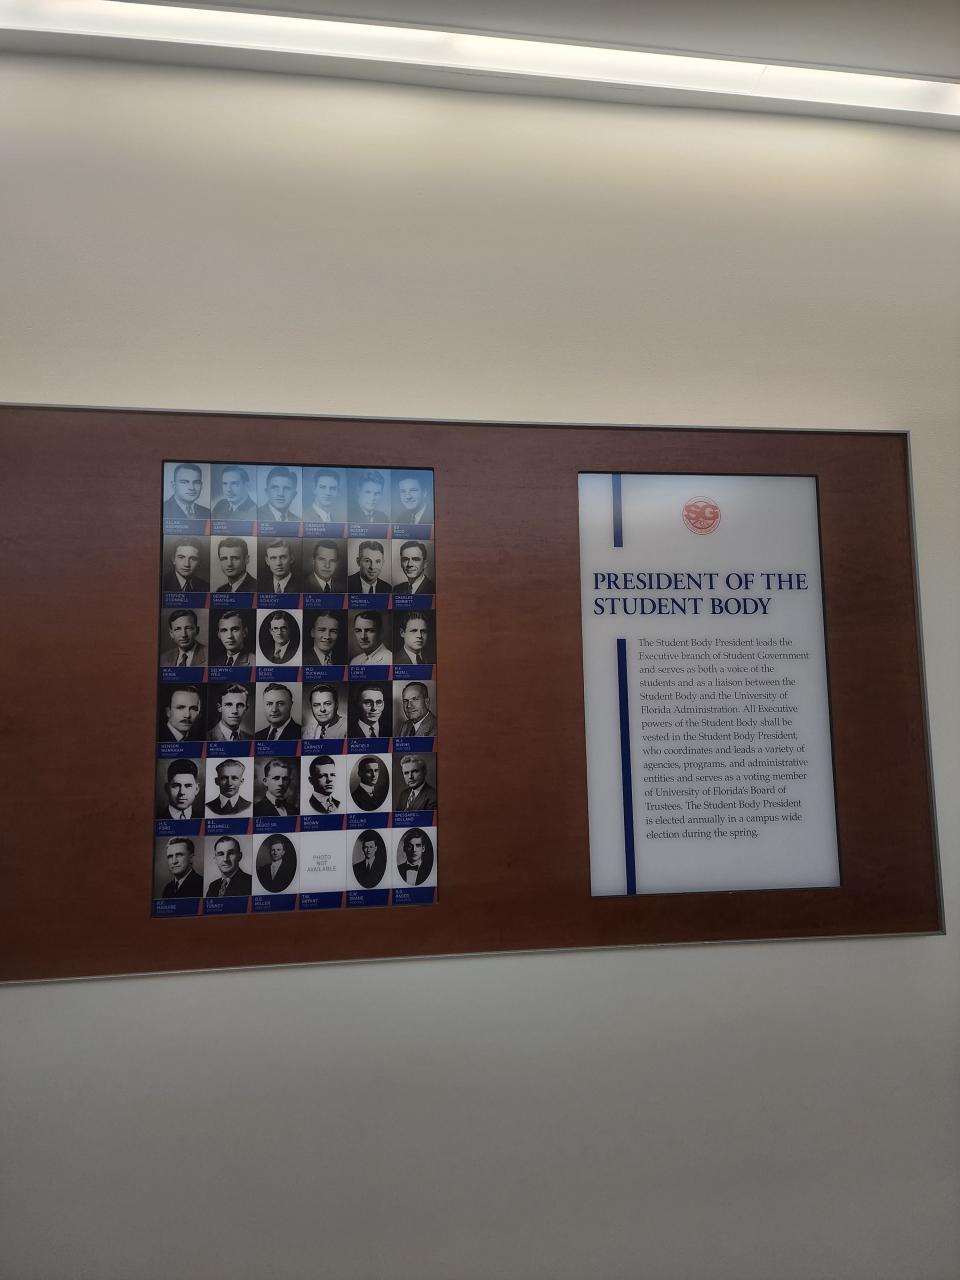 A collage image of past student body presidents at the University of Florida shows a missing photo of T.W. Bryant.